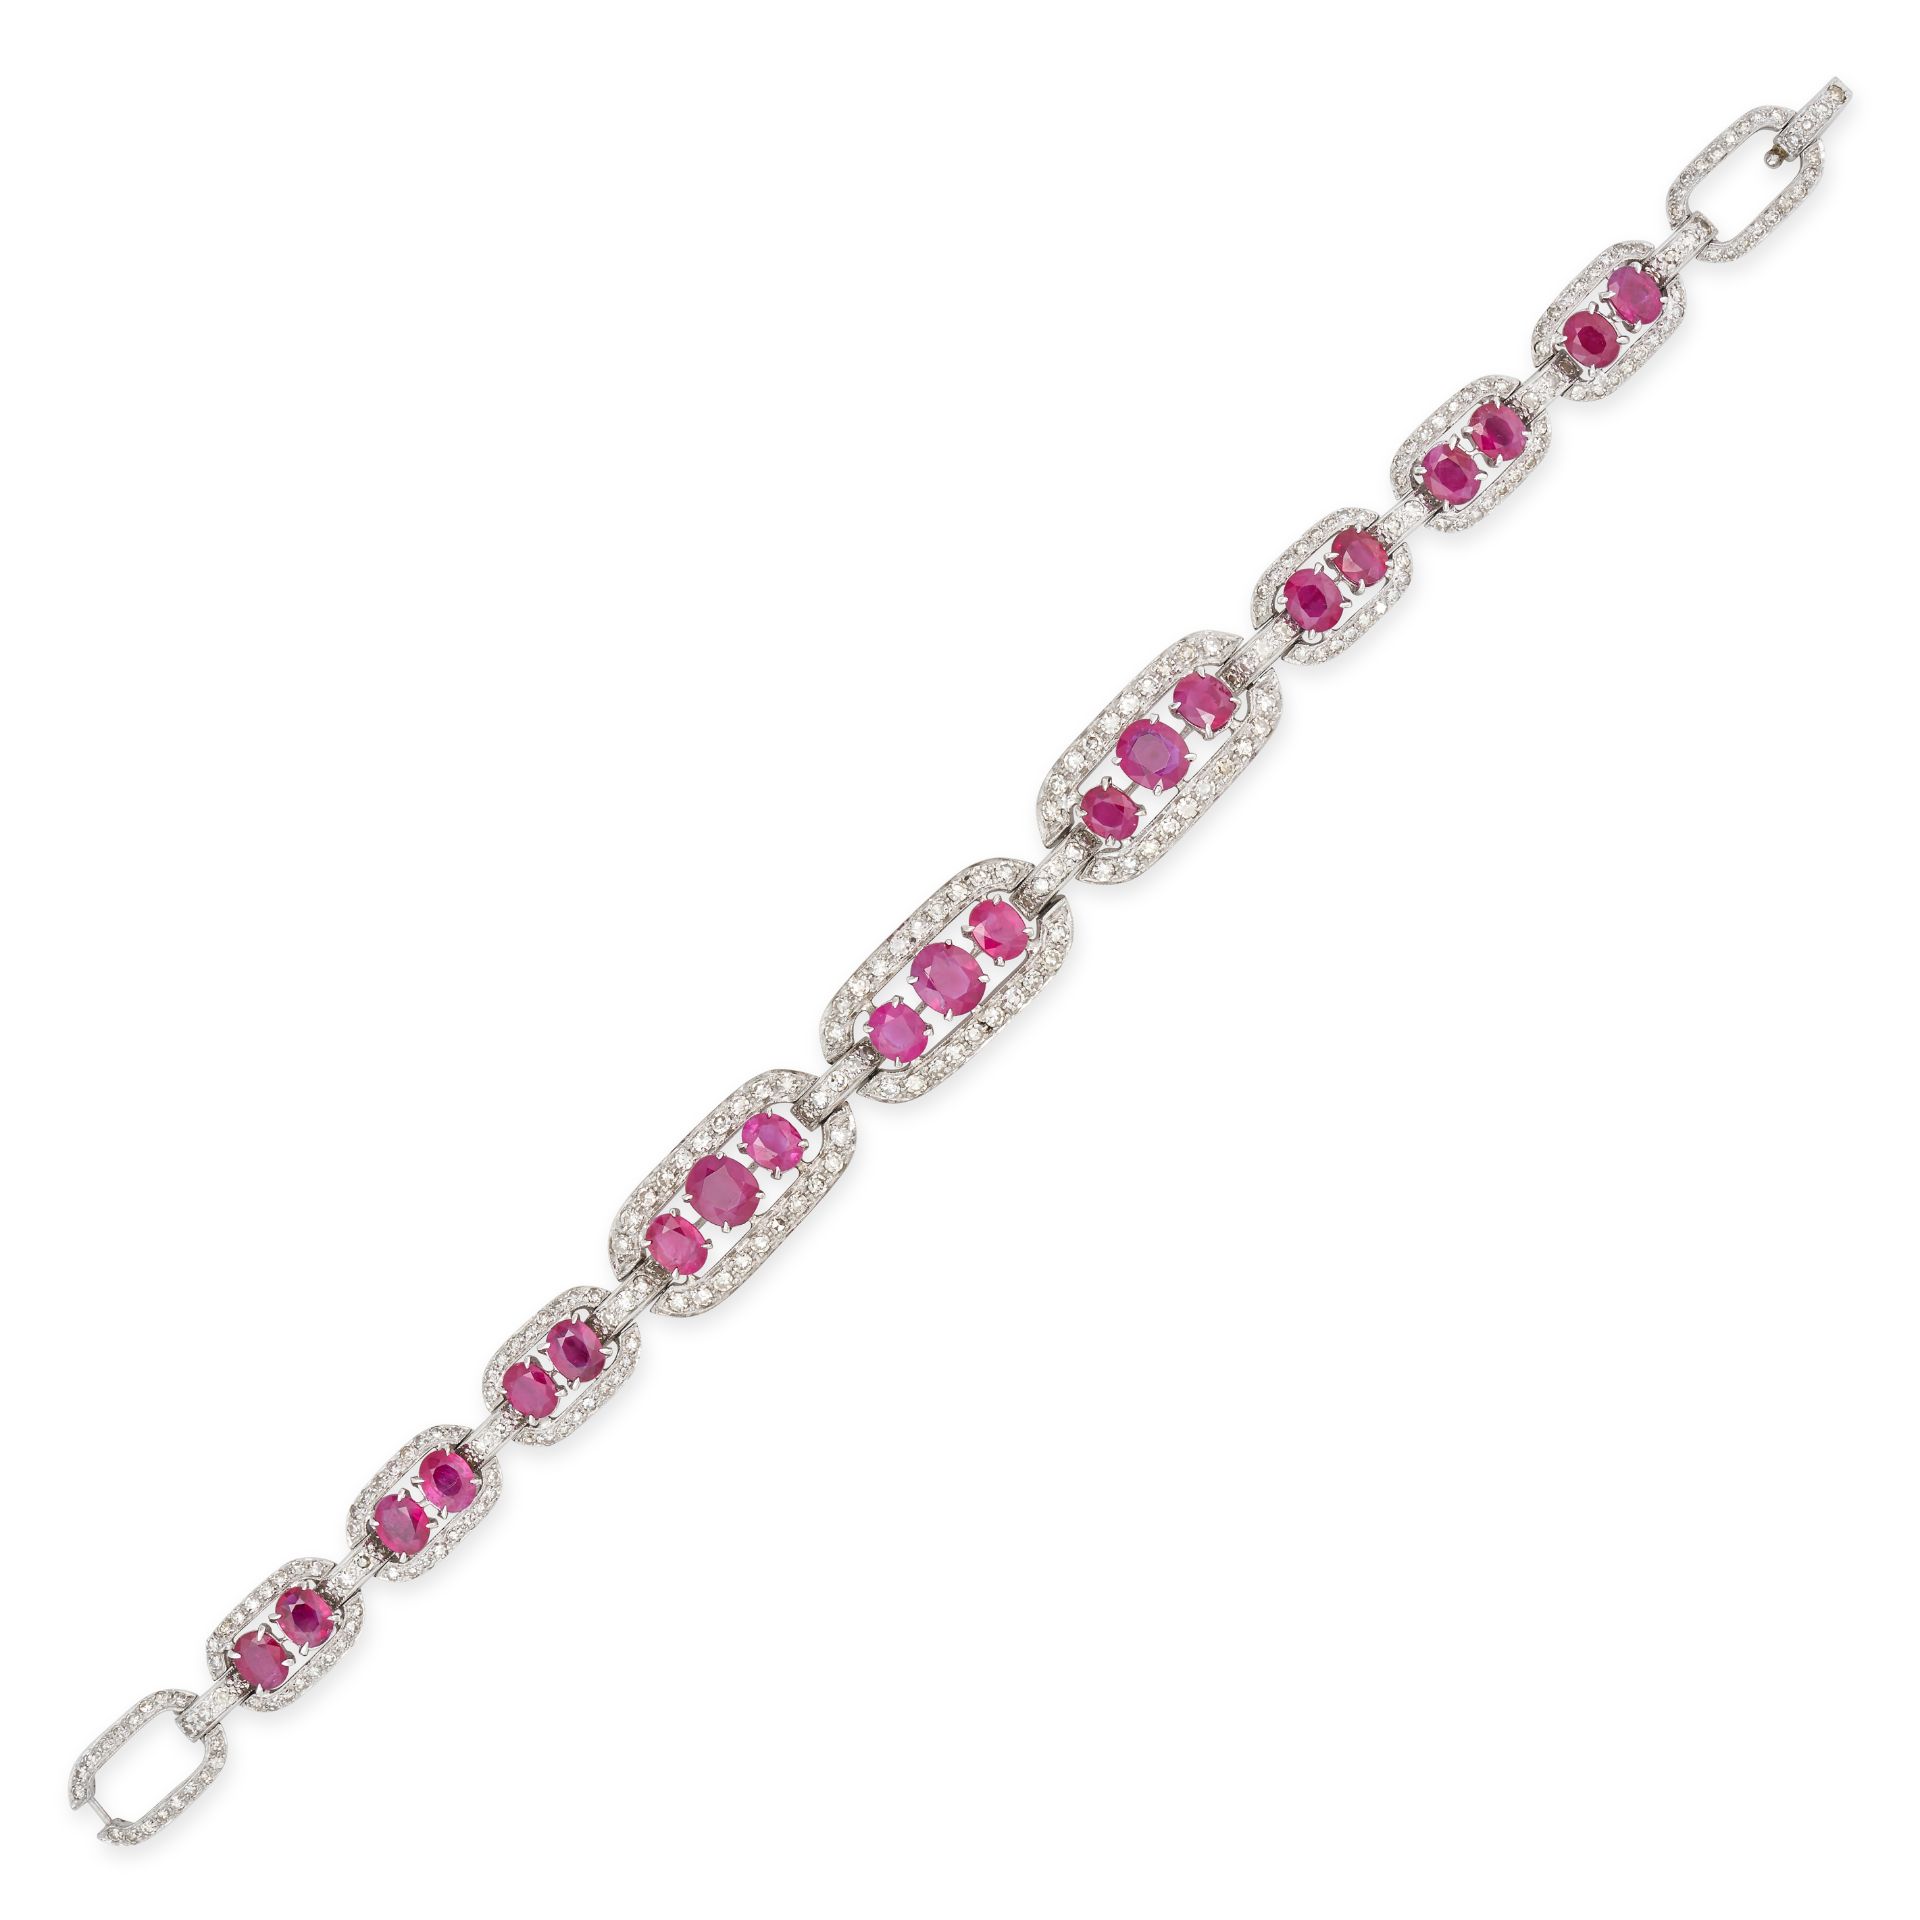 A BURMESE RUBY AND DIAMOND BRACELET in 14ct white gold, comprising a row of oval links set with o...